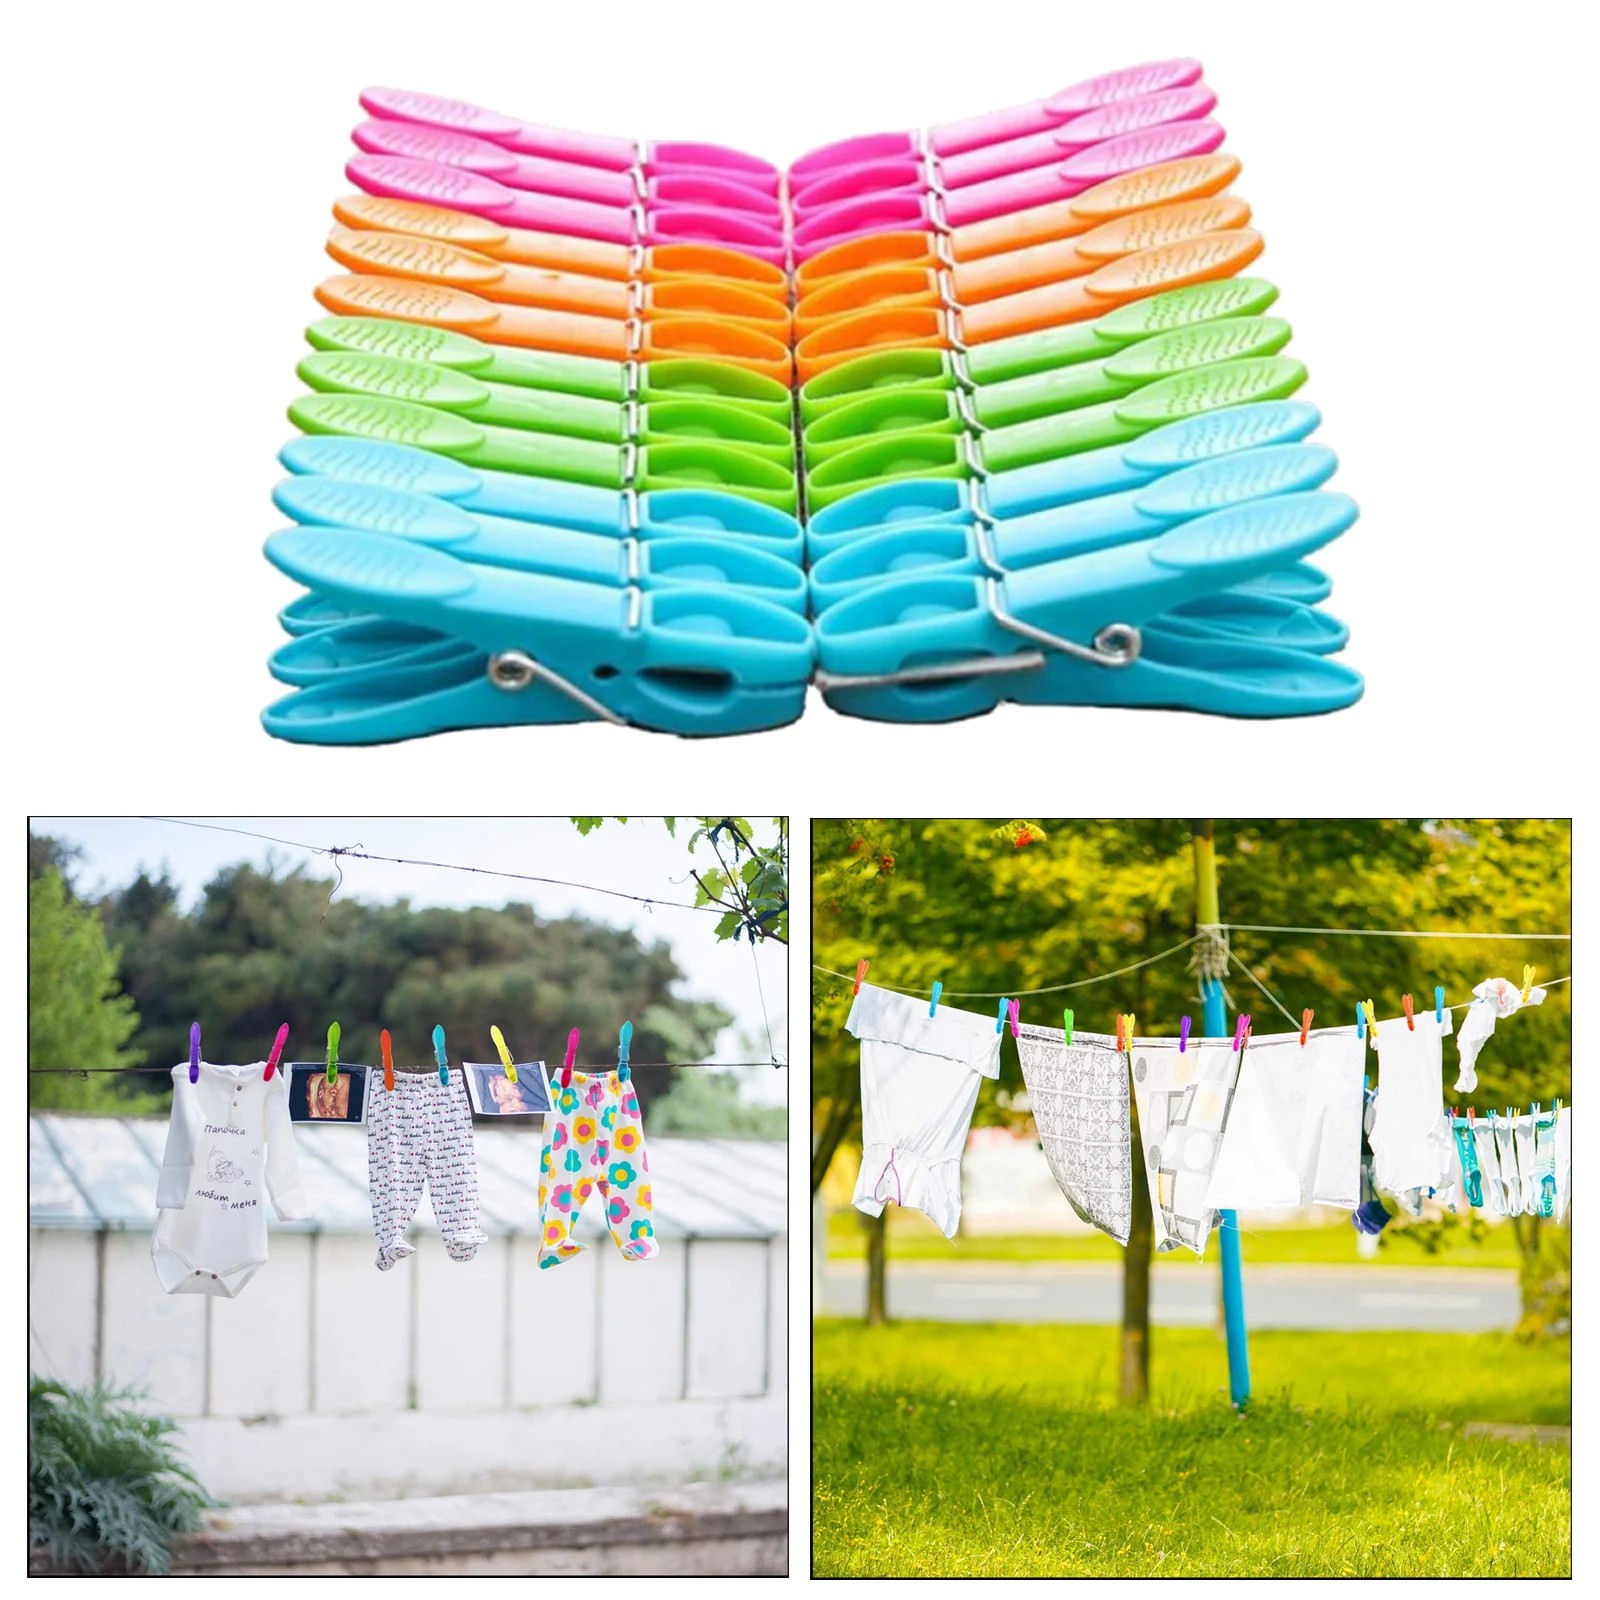 24 Pack Colorful Plastic Cloth Clip Windproof Clothes Pin with Spring Suitable For Kitchen Outdoor Travel Air Set